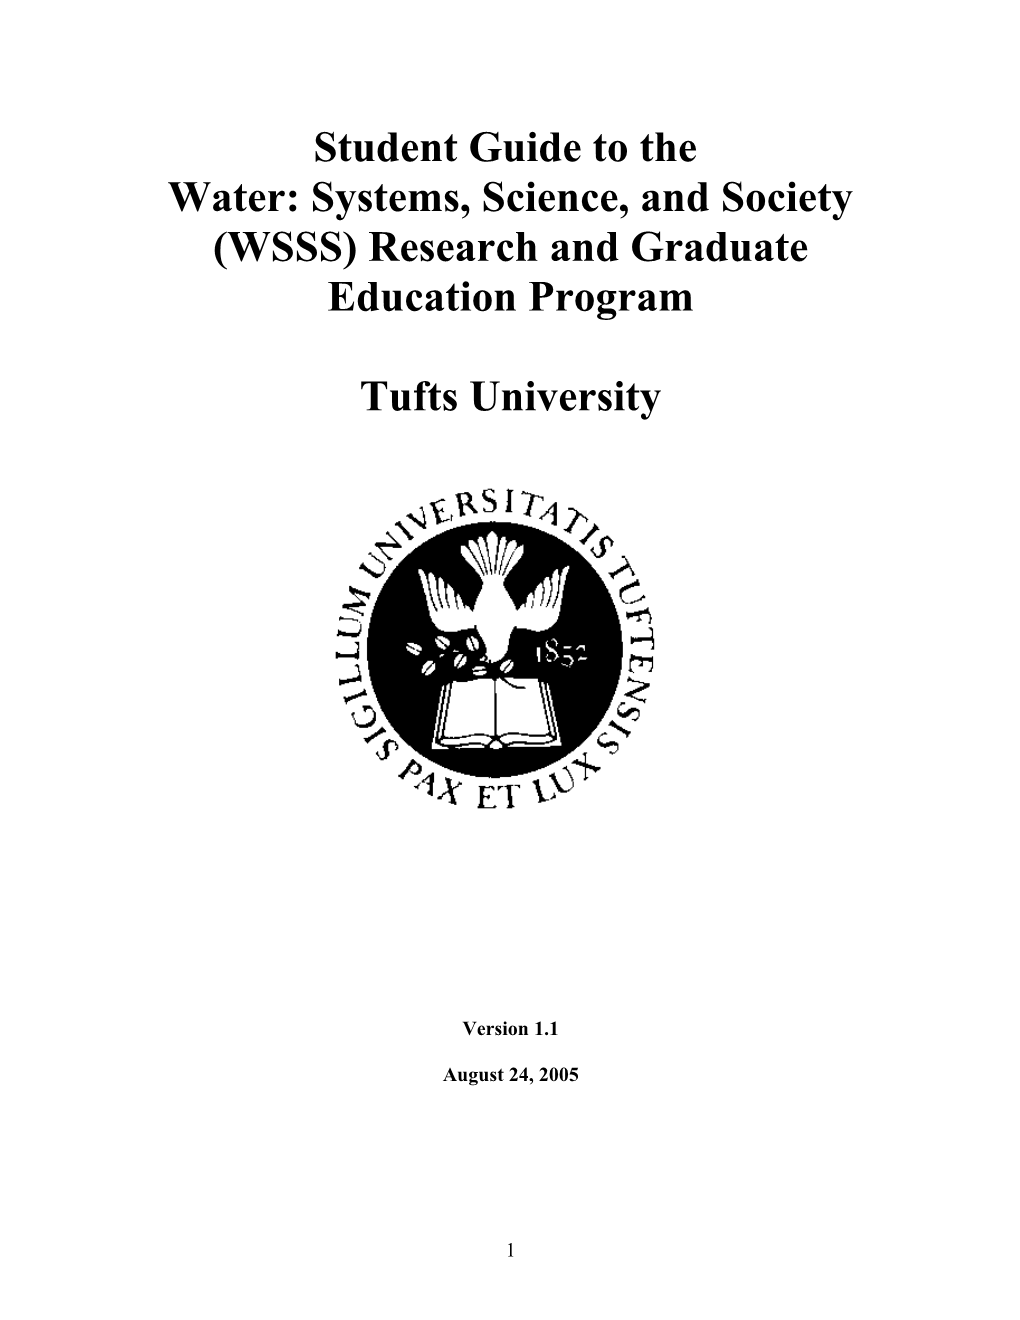 Water: Systems, Science, and Society (WSSS) Research and Graduate Education Program